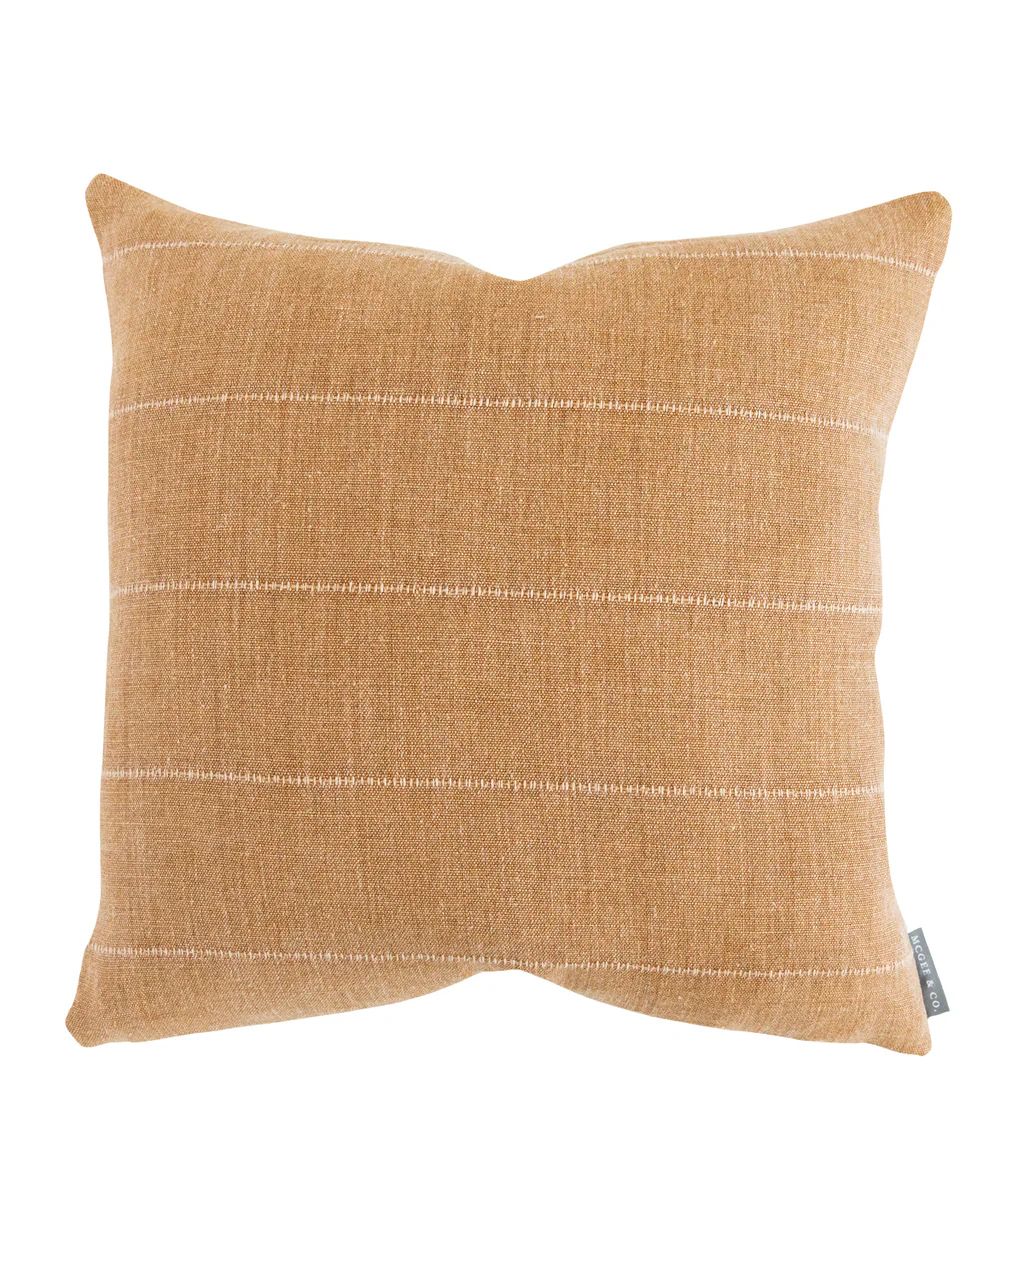 Quimby Pillow Cover | McGee & Co.